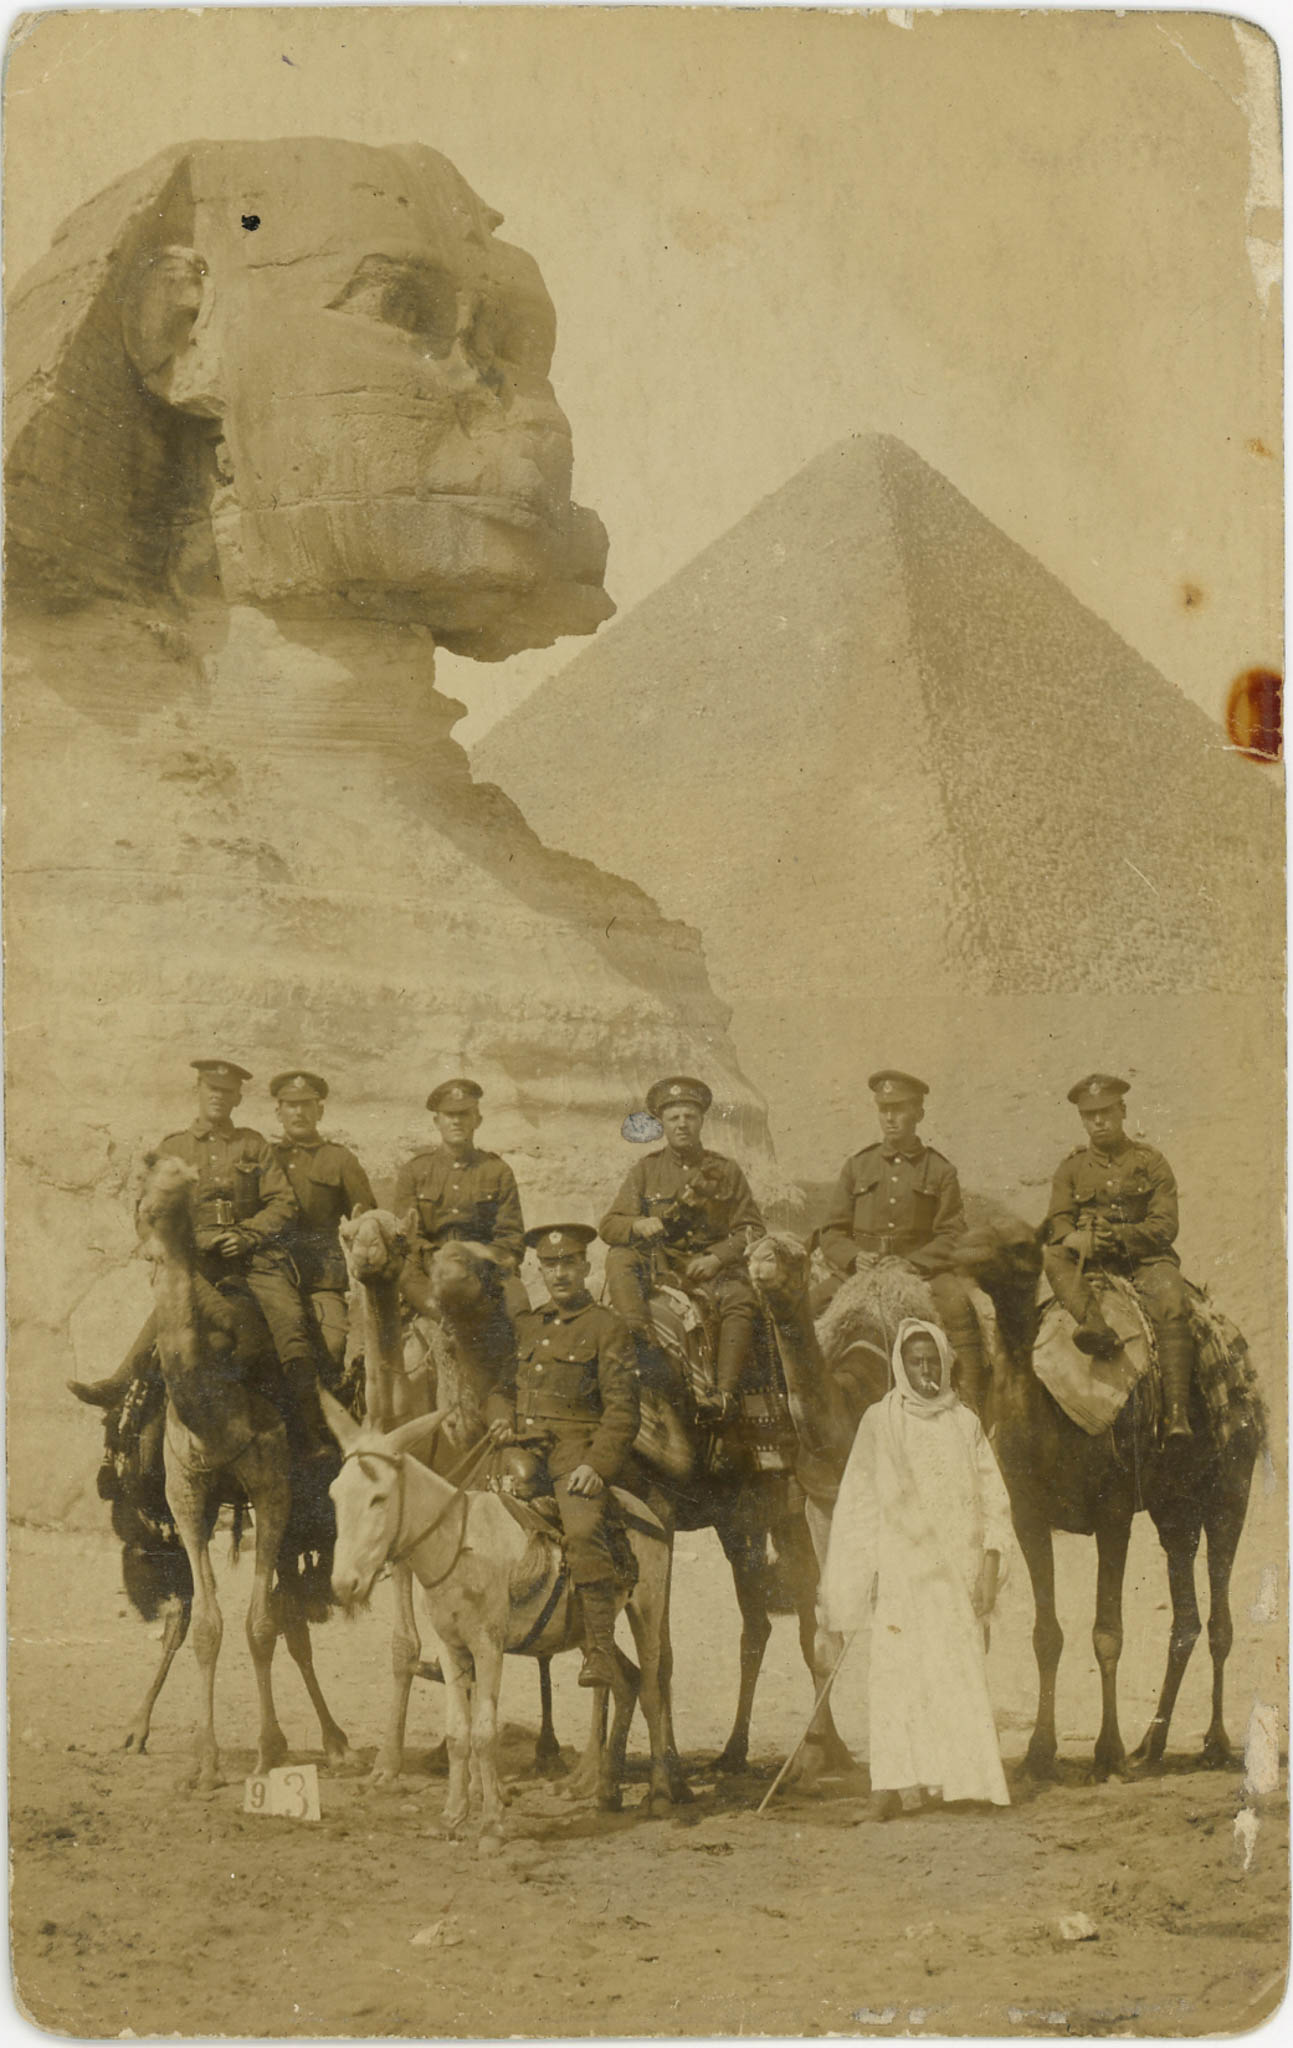 Soldiers on horseback in Egypt